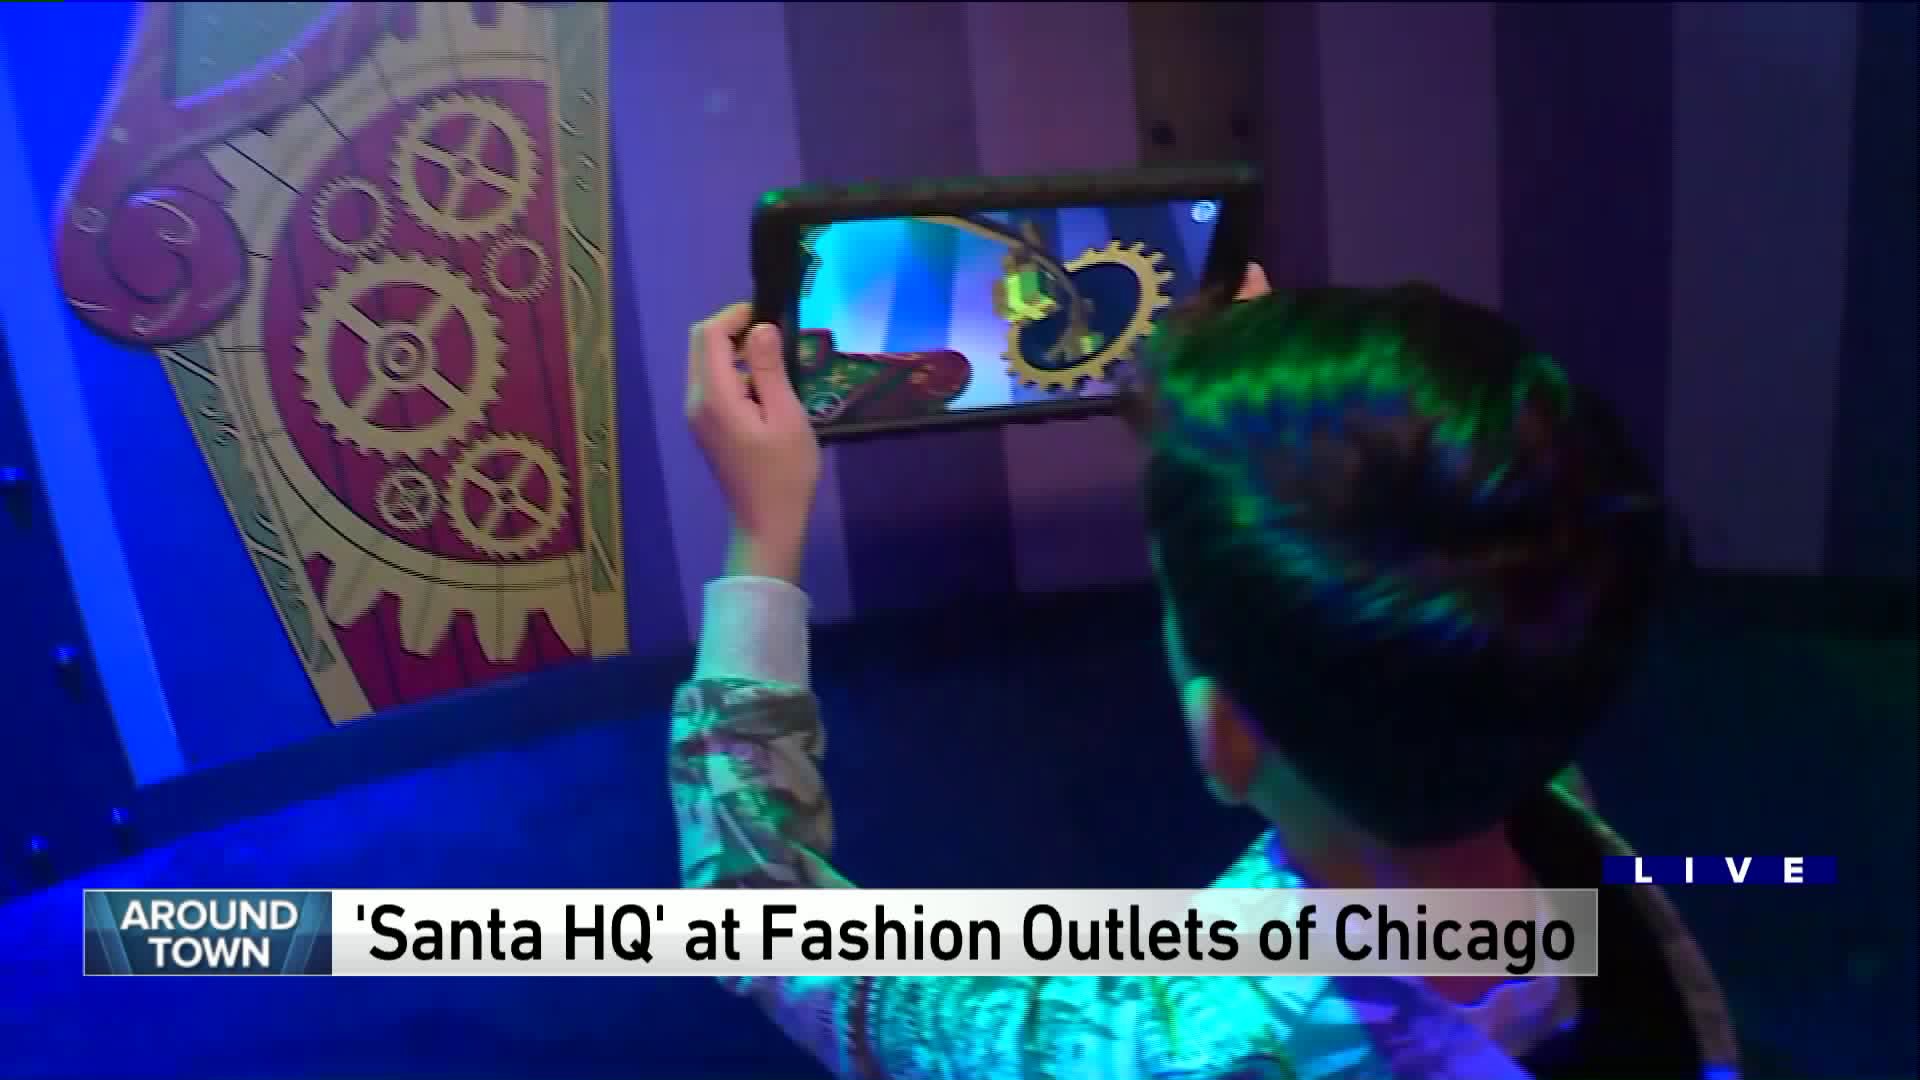 Around Town checks out ‘Santa HQ’ at Fashion Outlets of Chicago